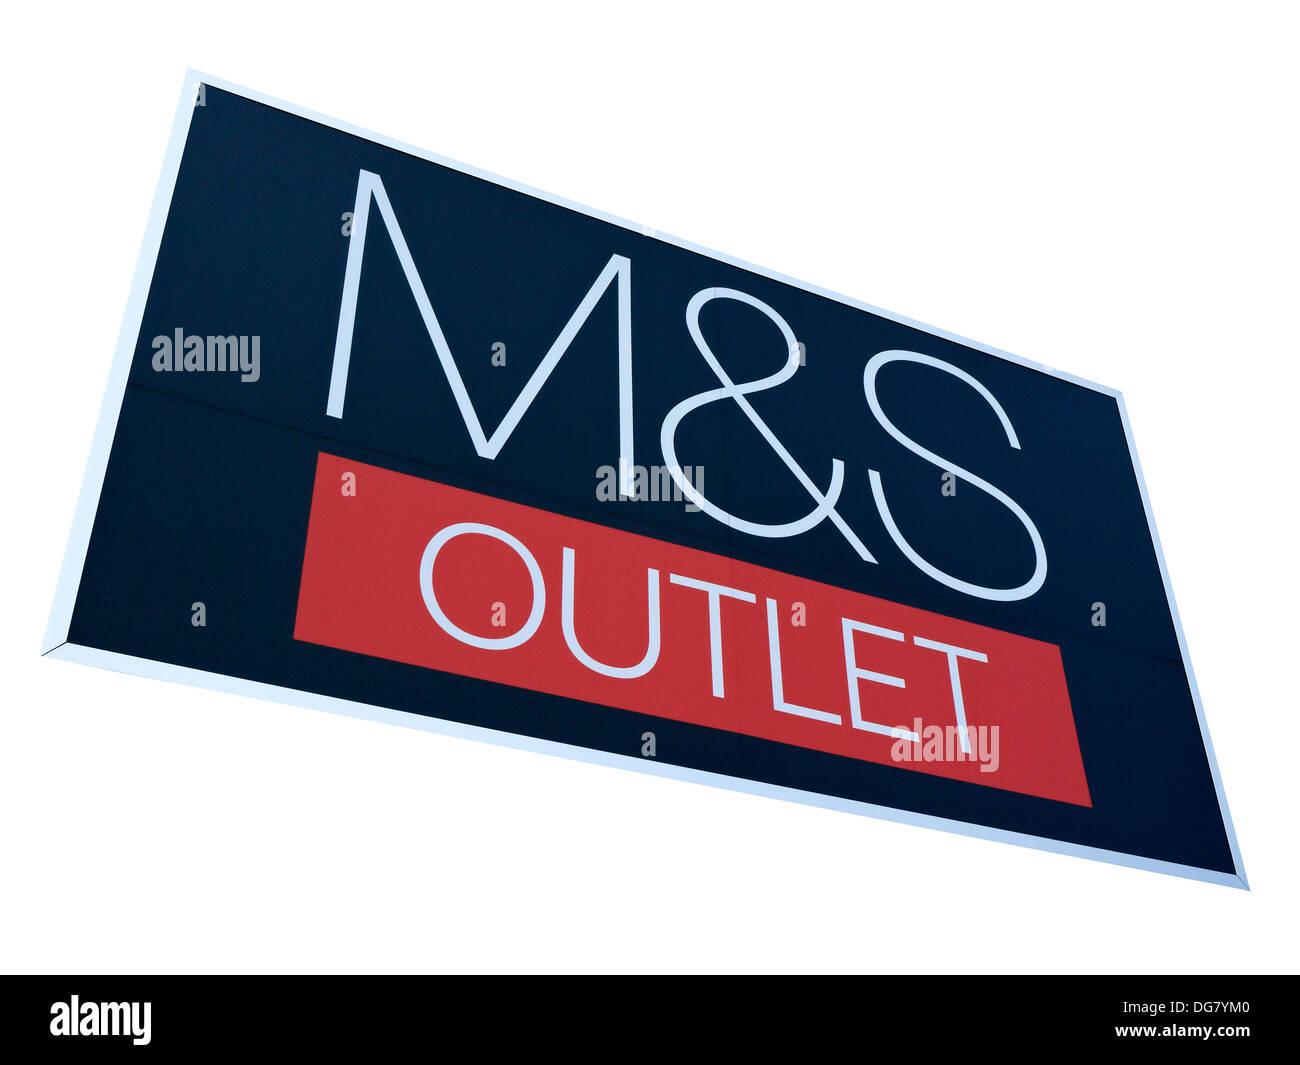 M&S Outlet sign Stock Photo